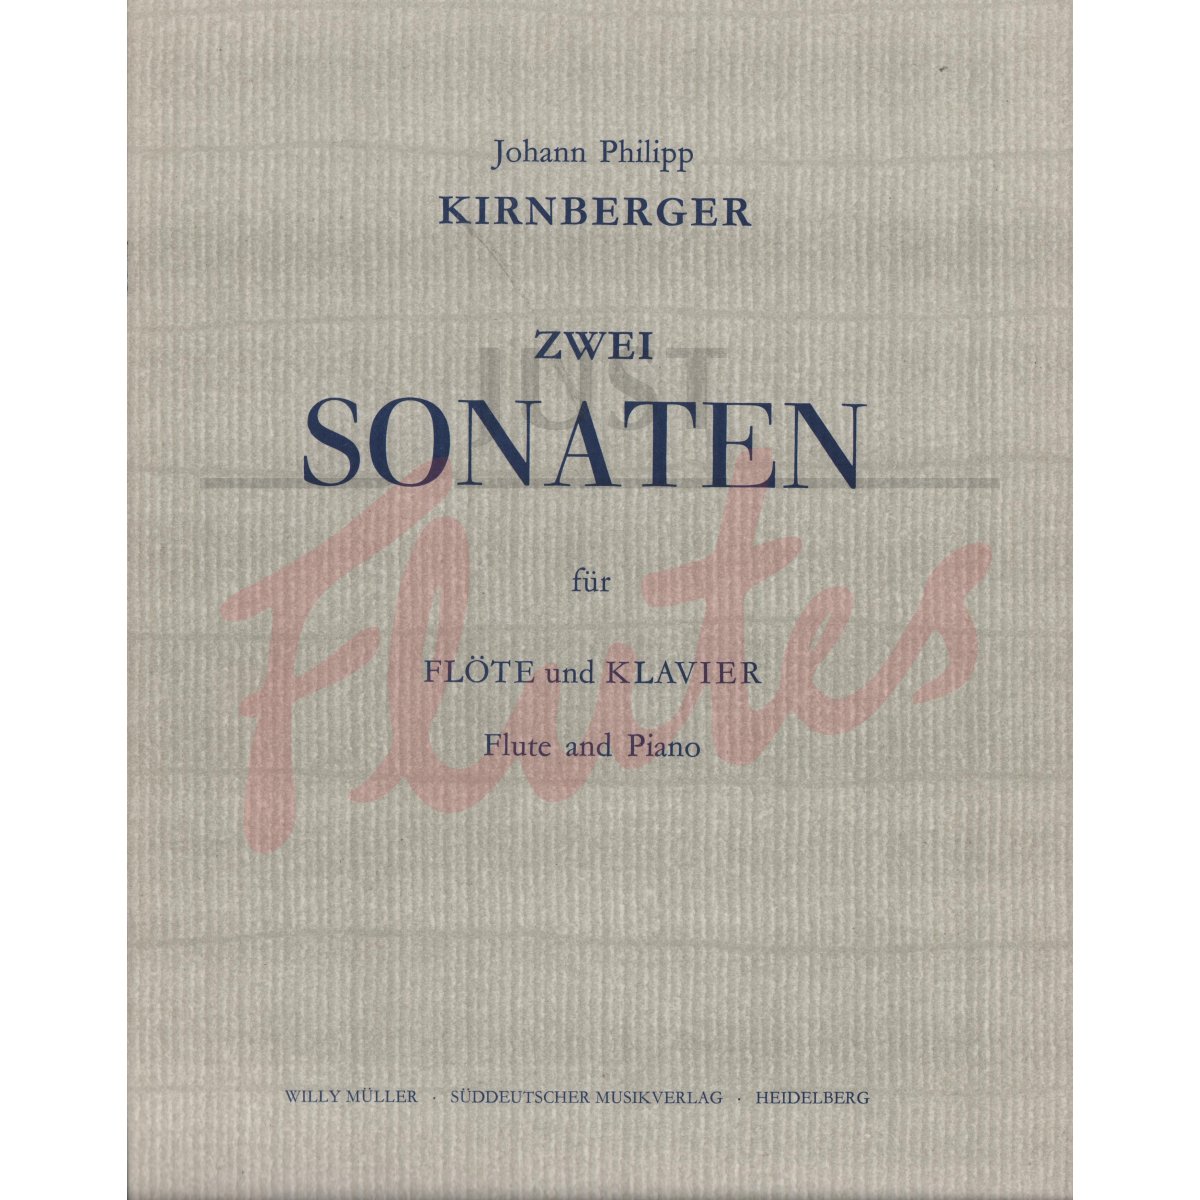 Two Sonatas for Flute and Piano